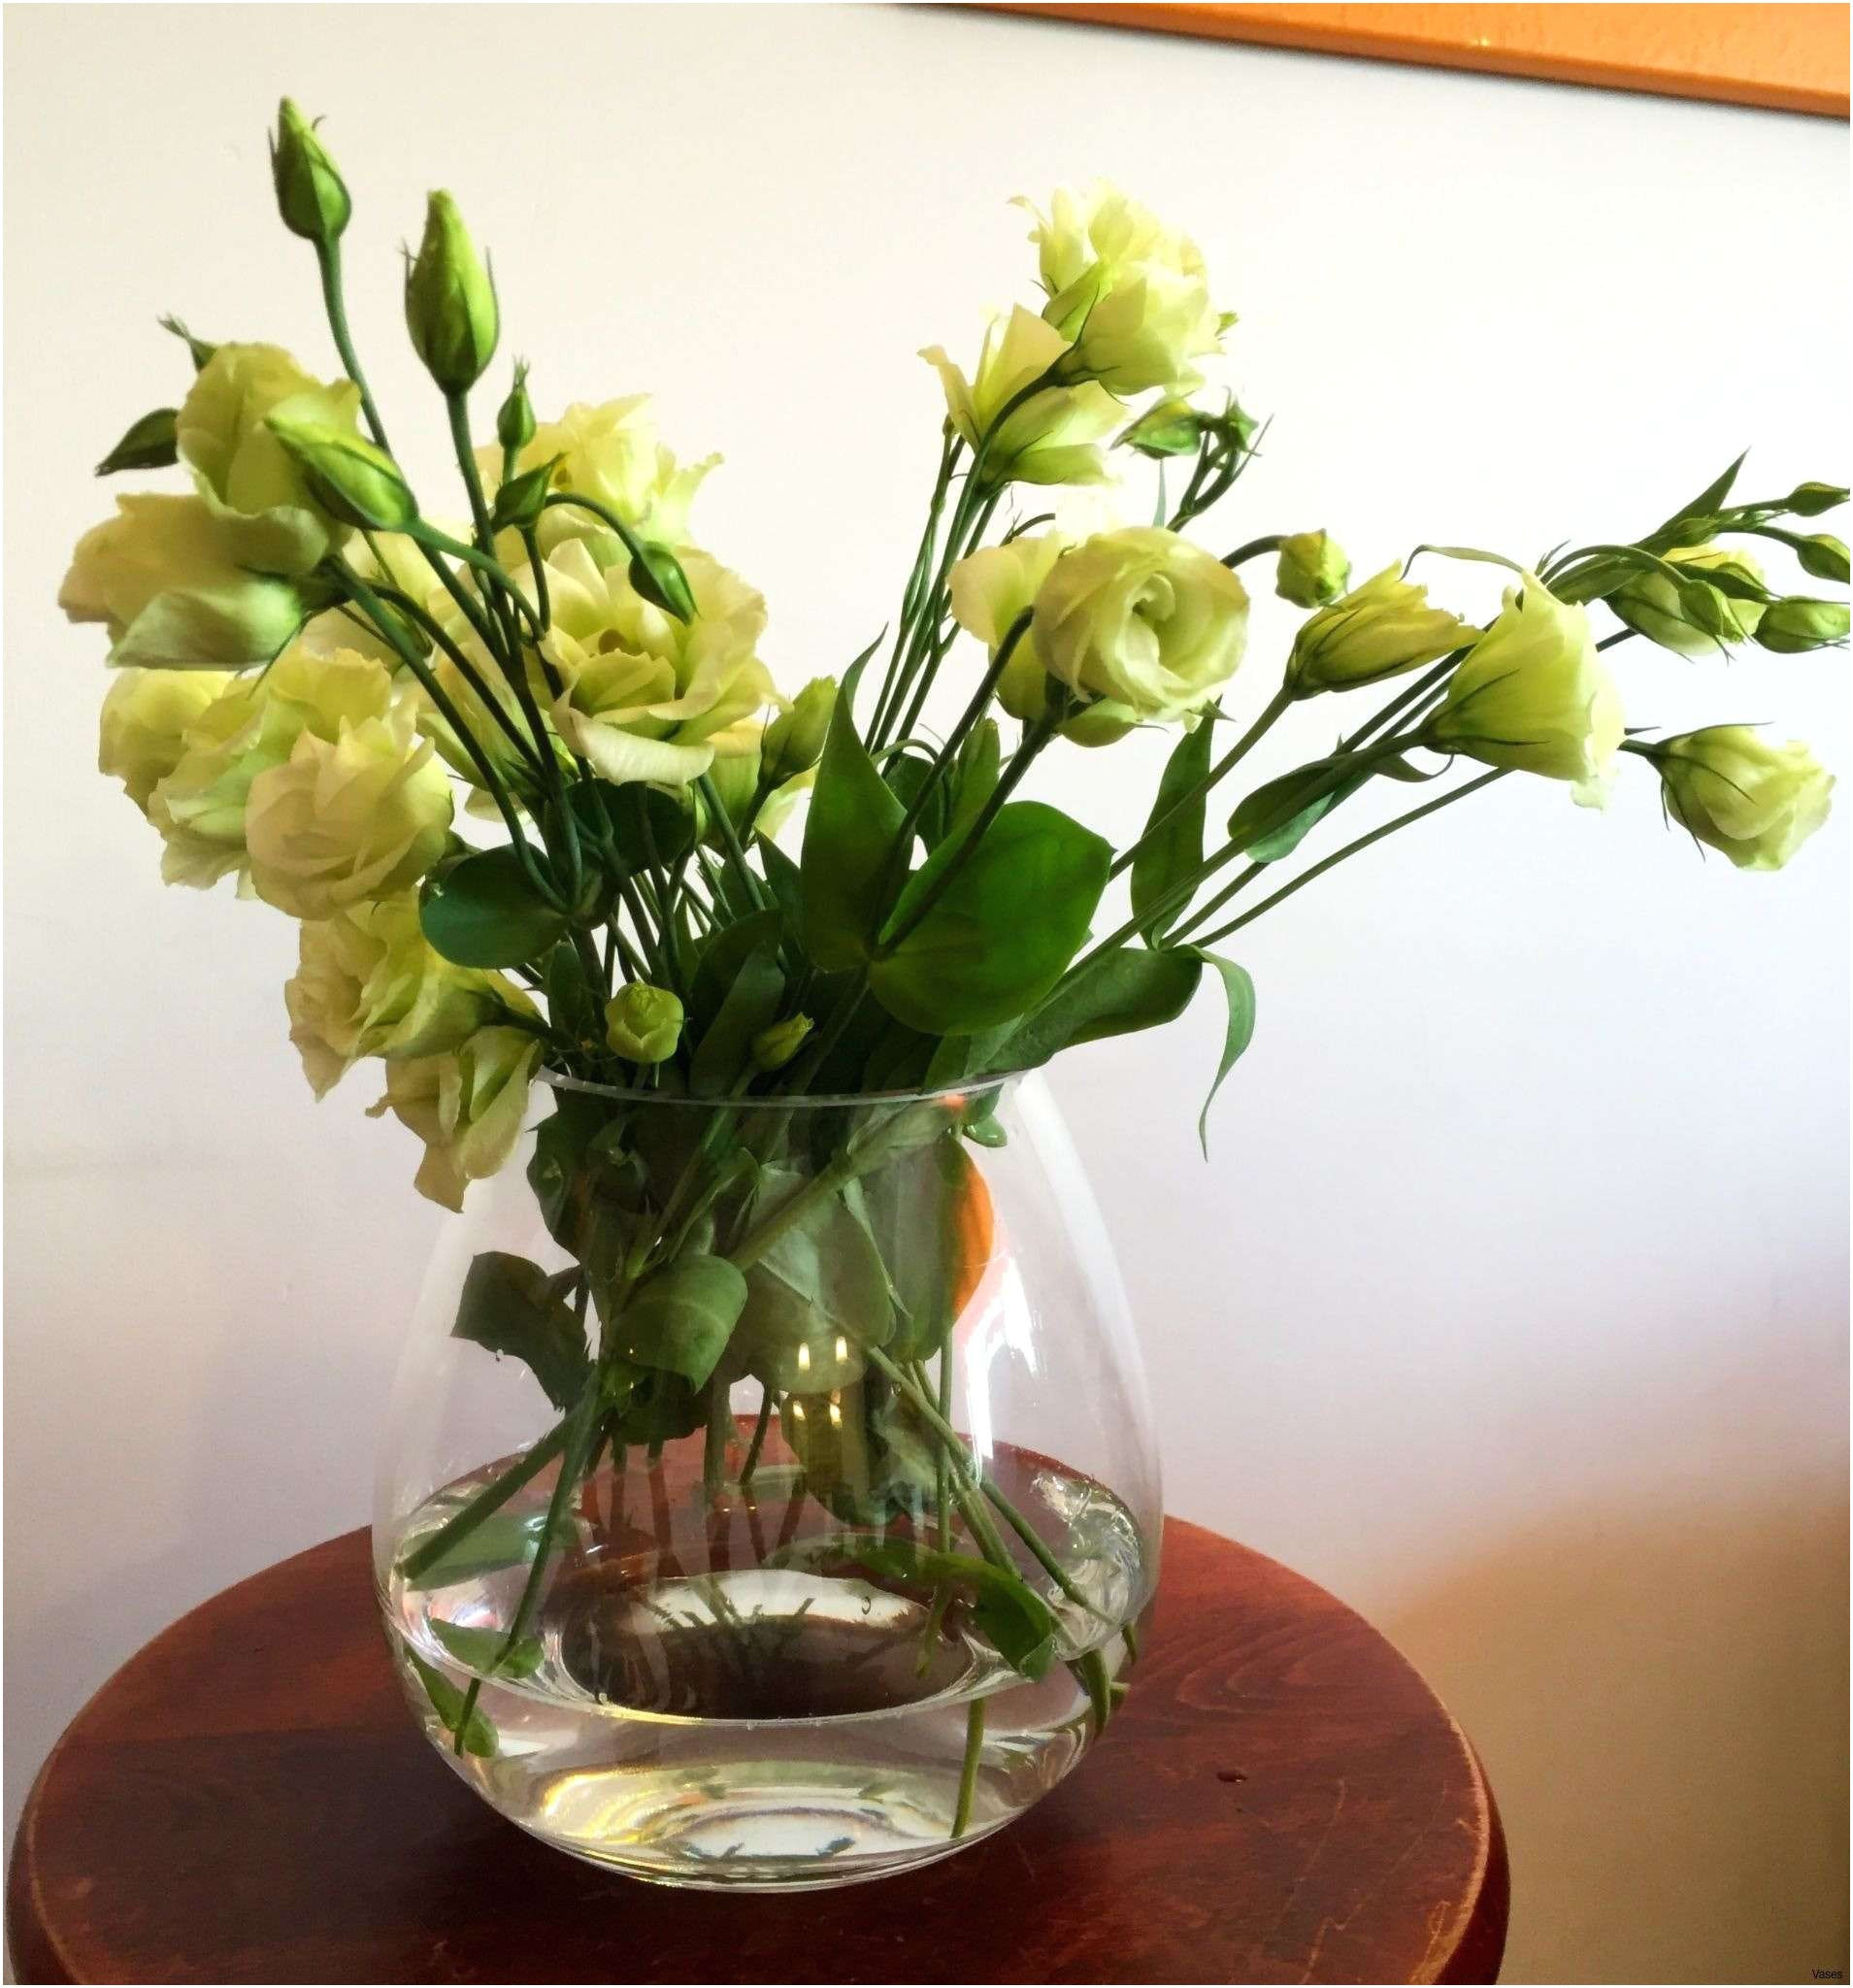 20 attractive Cracked Glass Vases wholesale 2023 free download cracked glass vases wholesale of tall green glass vase stock 7 best devil wears prada images on with tall green glass vase image tiger height awful flower vase table 04h vases tablei 0d clip